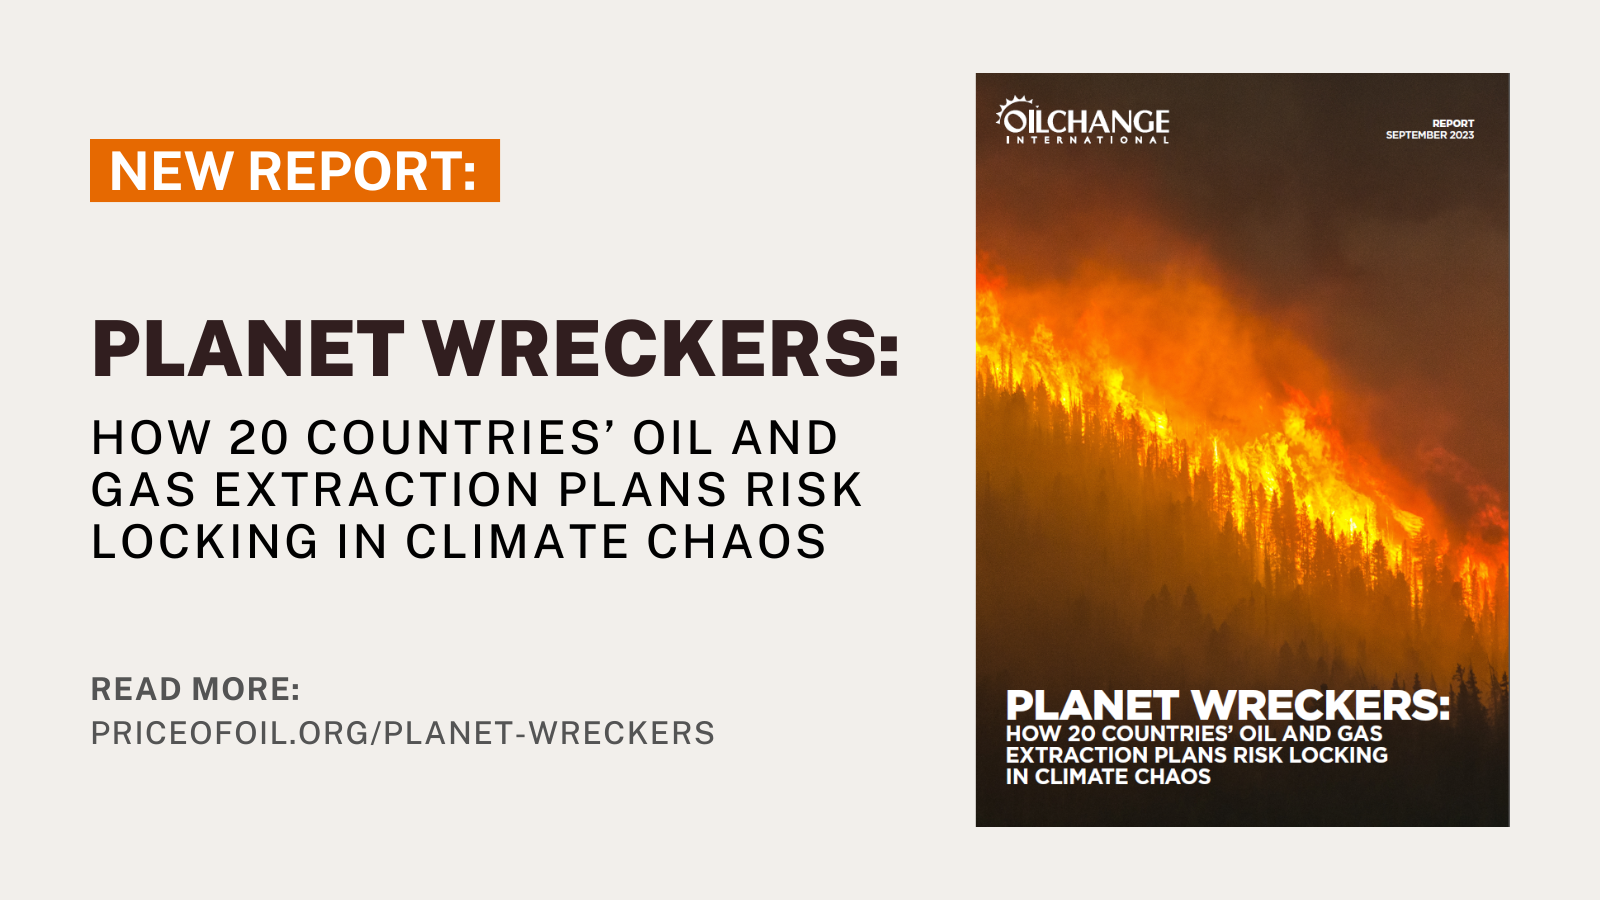 Planet Wreckers: How Countries’ Oil and Gas Extraction Plans Risk Locking in Climate Chaos